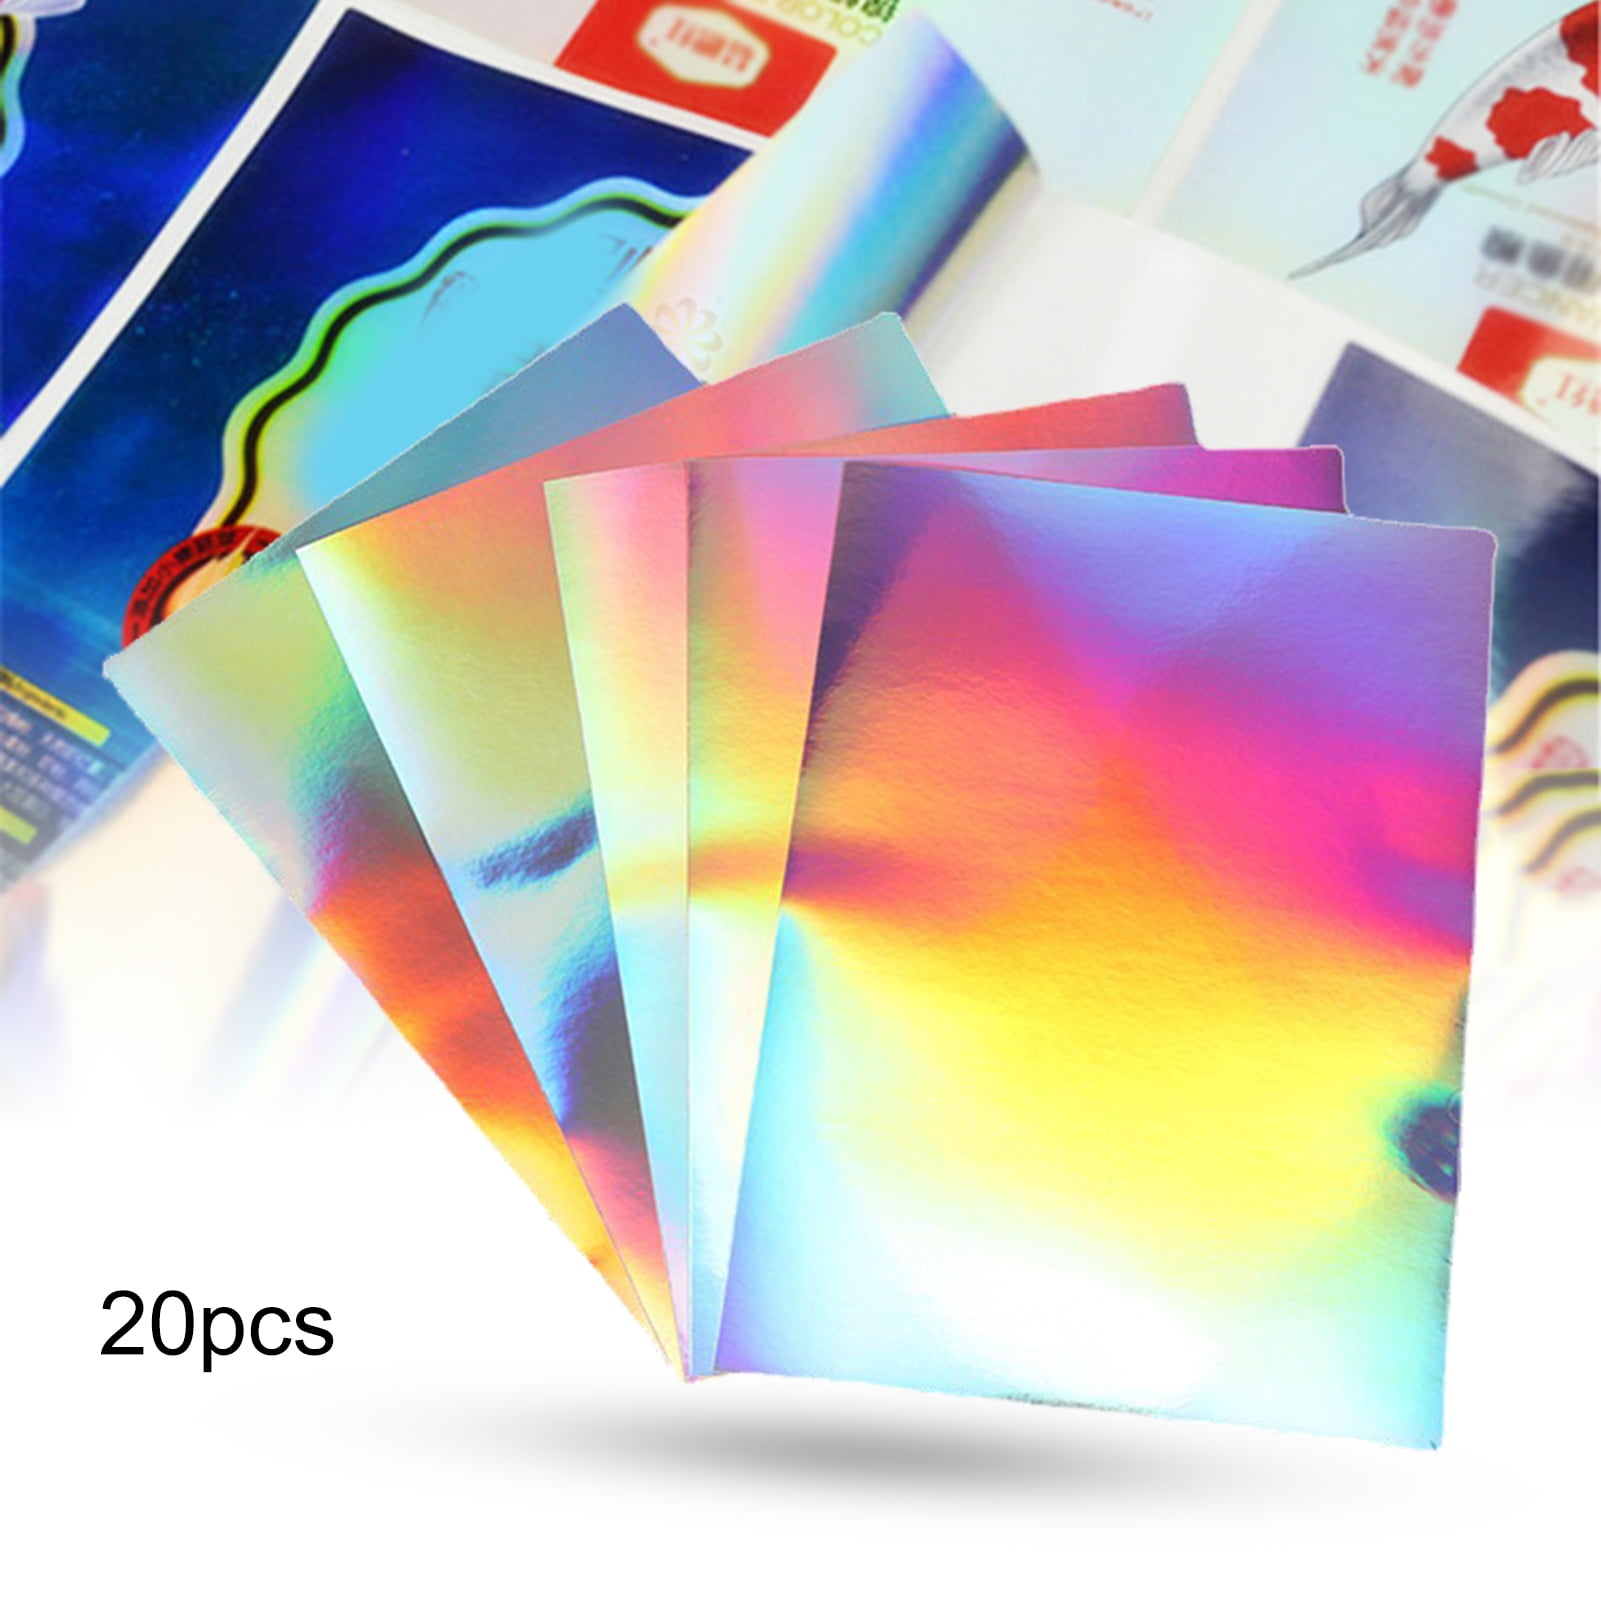 20% Off 20 x A4 Sheets Of Self Adhesive Craft Vinyl 